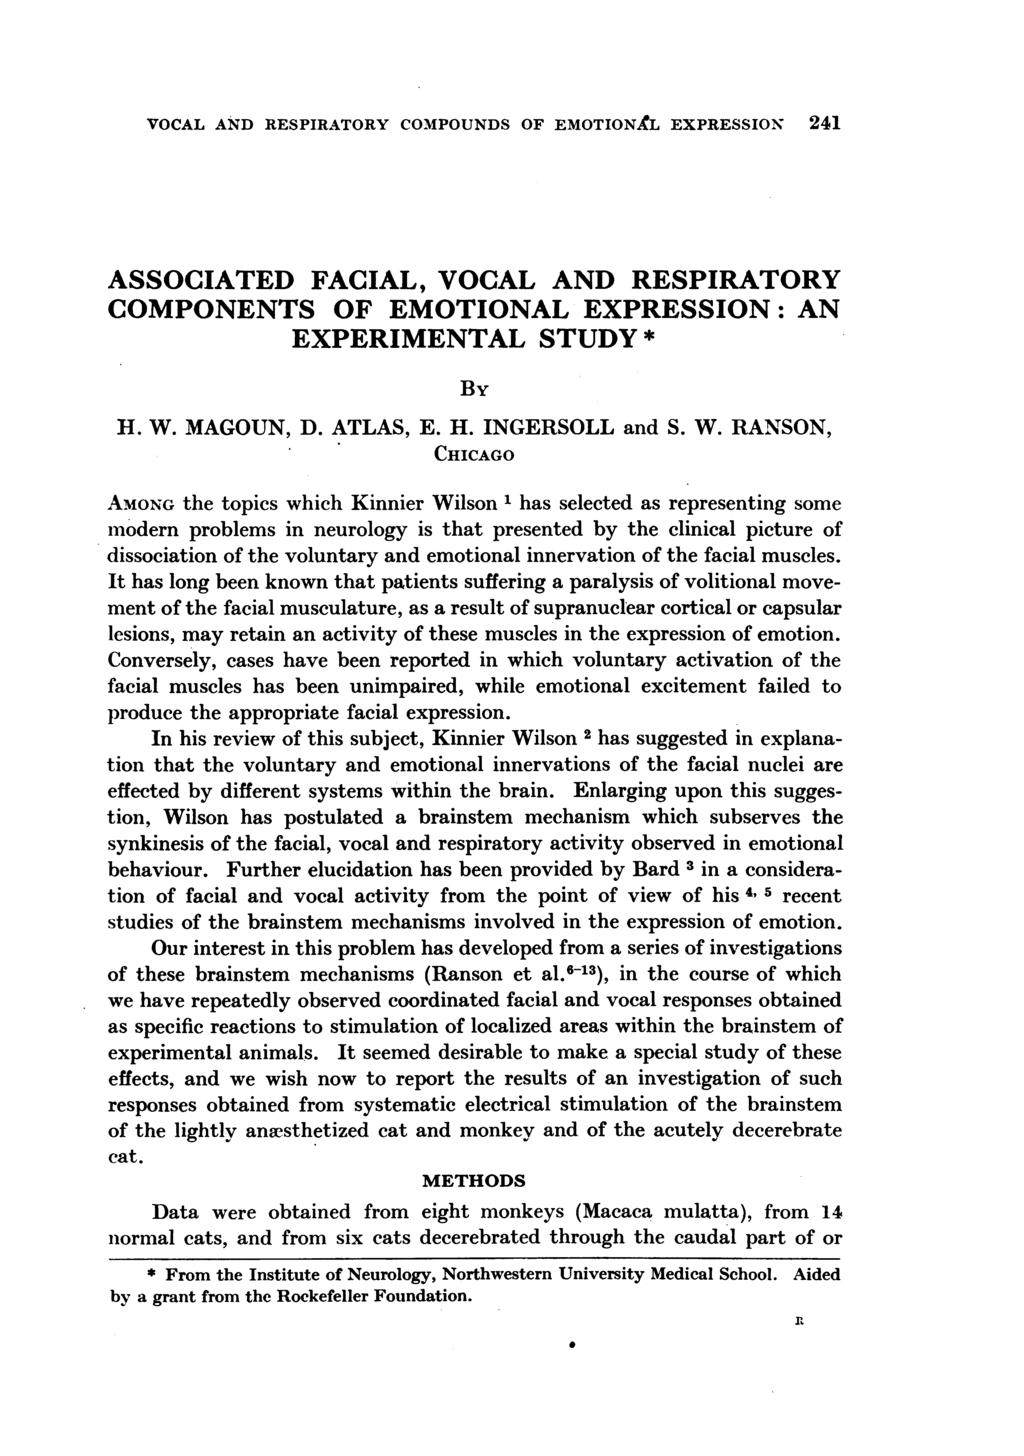 VOCAL AND RESPIRATORY COMPOUNDS OF EMOTIONXL EXPRESSION 241 ASSOCIATED FACIAL, VOCAL AND RESPIRATORY COMPONENTS OF EMOTIONAL EXPRESSION: AN EXPERIMENTAL STUDY* BY H. W. MAGOUN, D. ATLAS, E. H. INGERSOLL and S.